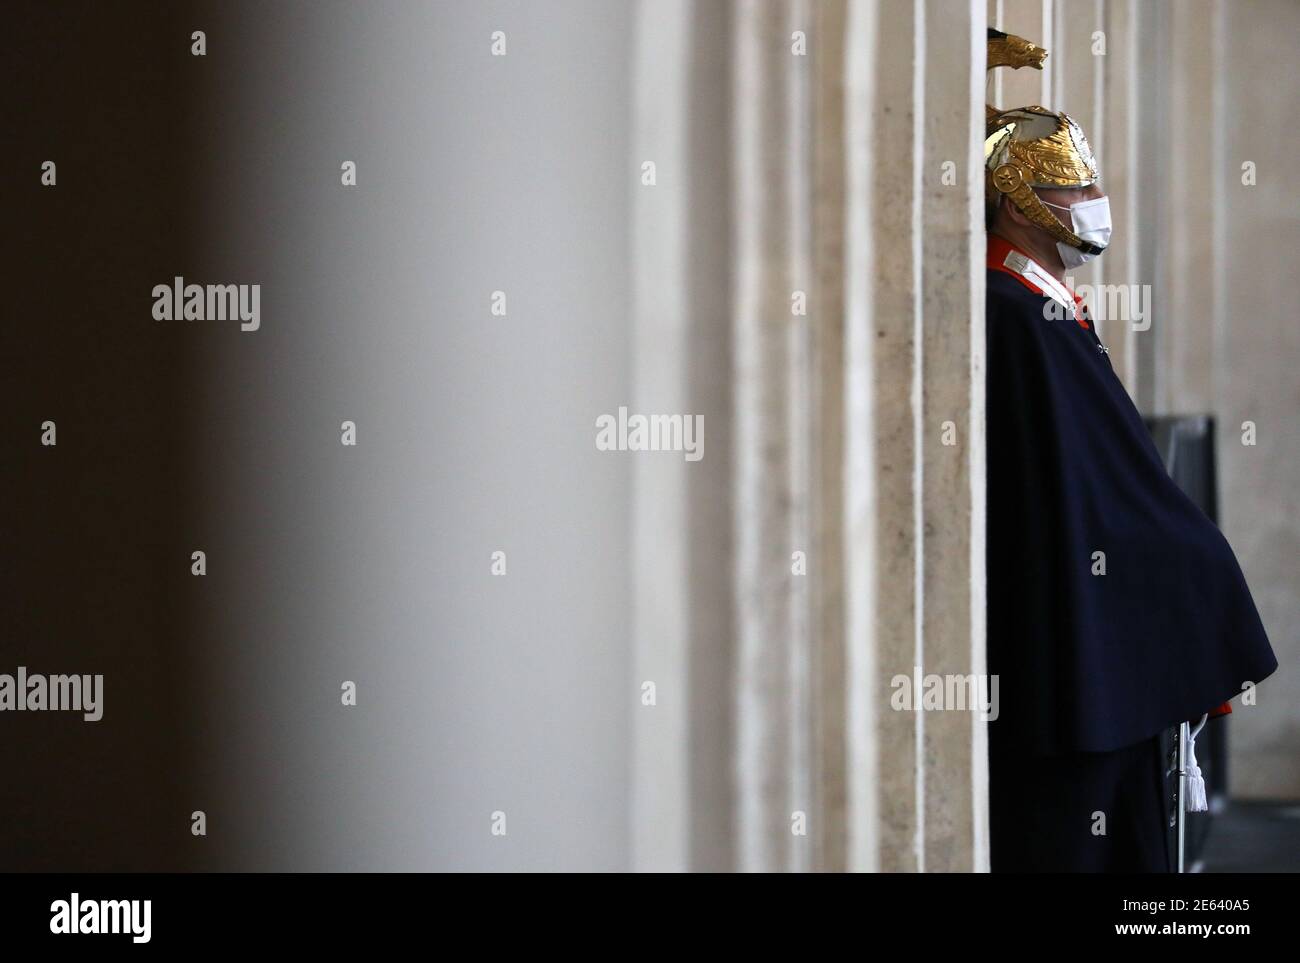 Rome Rome, Italy. 28th Jan, 2021. A Corazziere, a member of a specialized company of the Carabinieri (Italian Military Police) stands guard wearing a protective mask during talks between italian party leaders with Italian President Sergio Mattarella at the Quirinale Palace in Rome, Italy, on Thursday, Jan. 28, 2021. The resignation of Italian Prime Minister Giuseppe Conte has sparked a fresh round of back-room plotting and negotiating as the pandemic rages and the economy tanks. Photographer: Alessia Pierdomenico/Bloomberg Credit: Independent Photo Agency/Alamy Live News Stock Photo